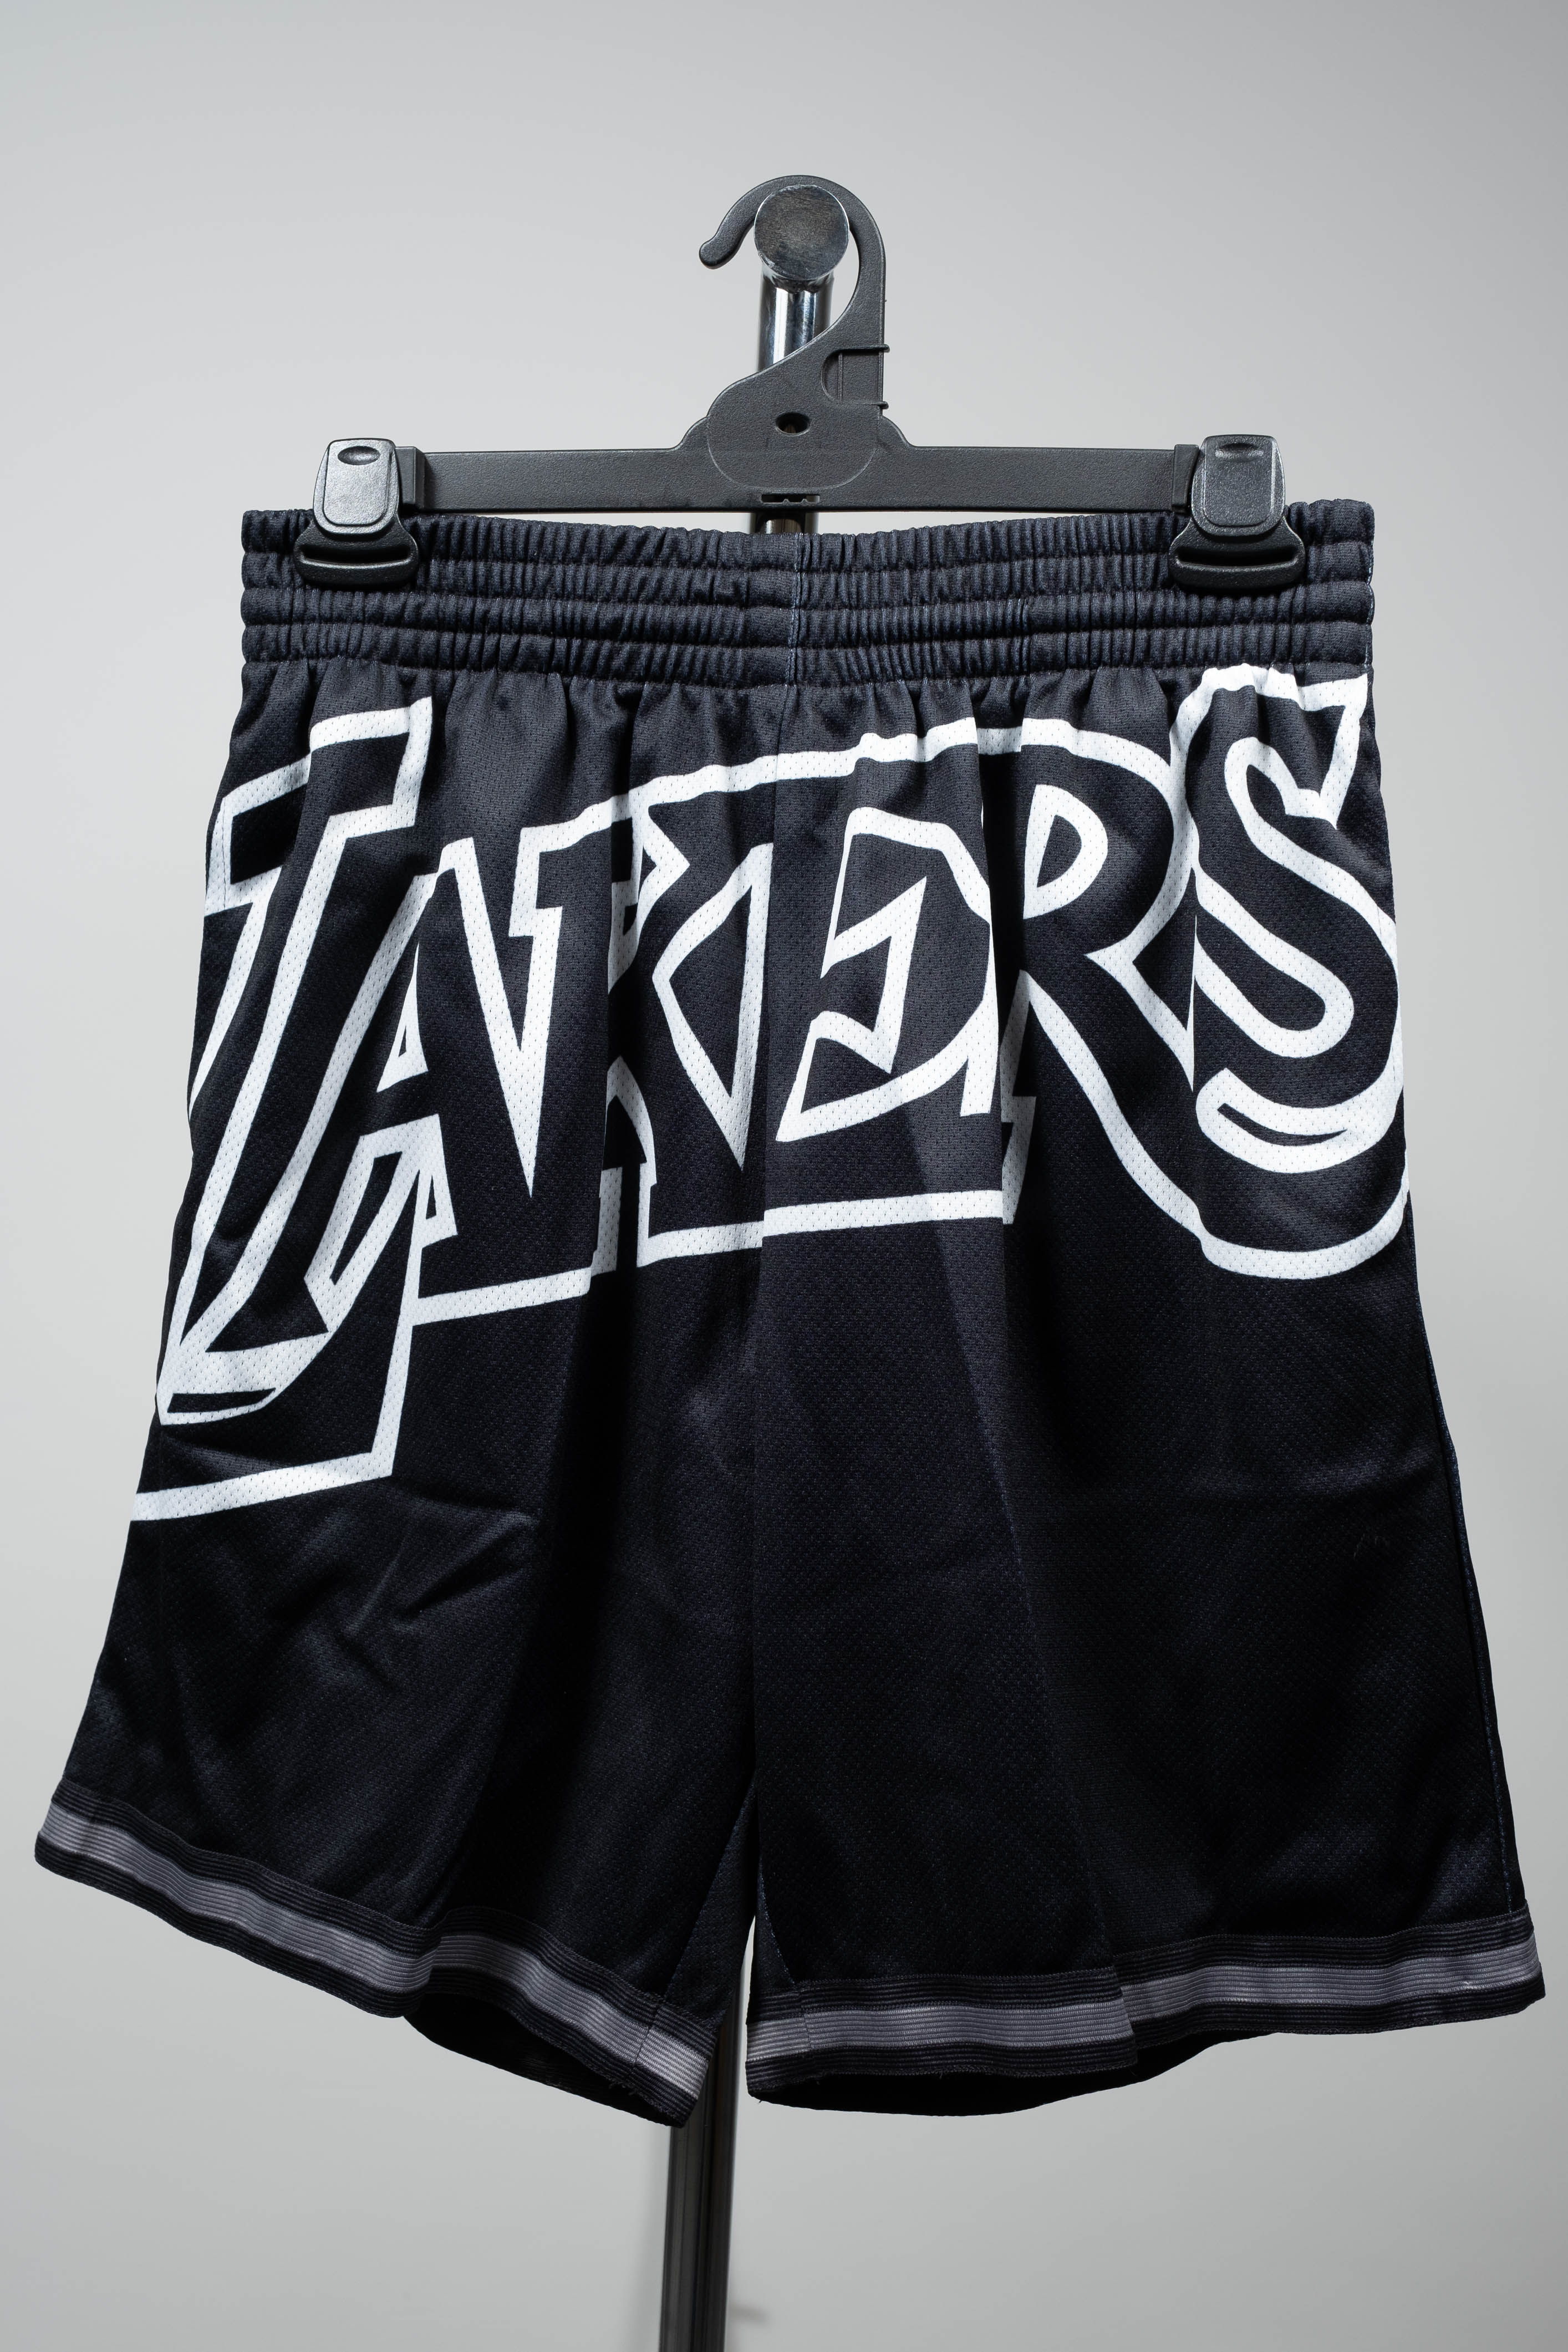 Lakers Big Face Shorts 3.0 - Eight One